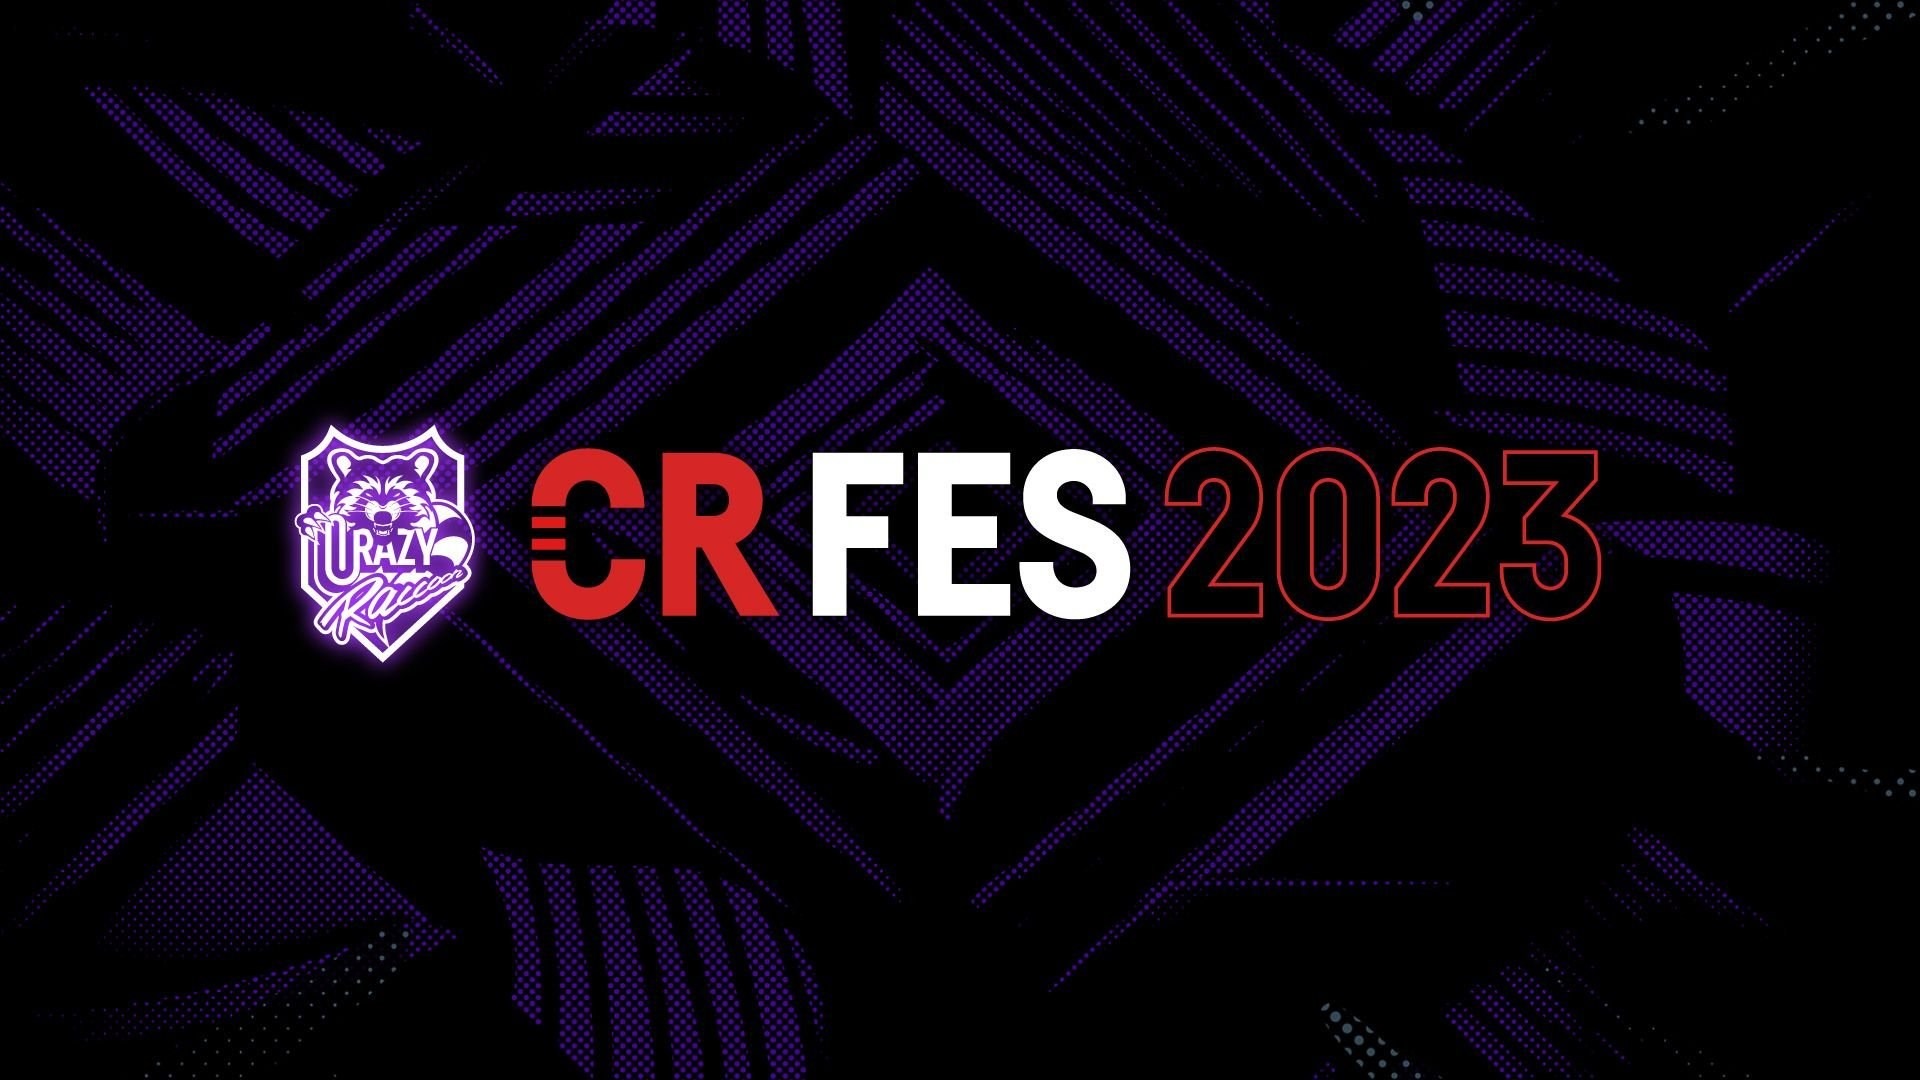 CRフェス 2023 缶バッジ　4点セット